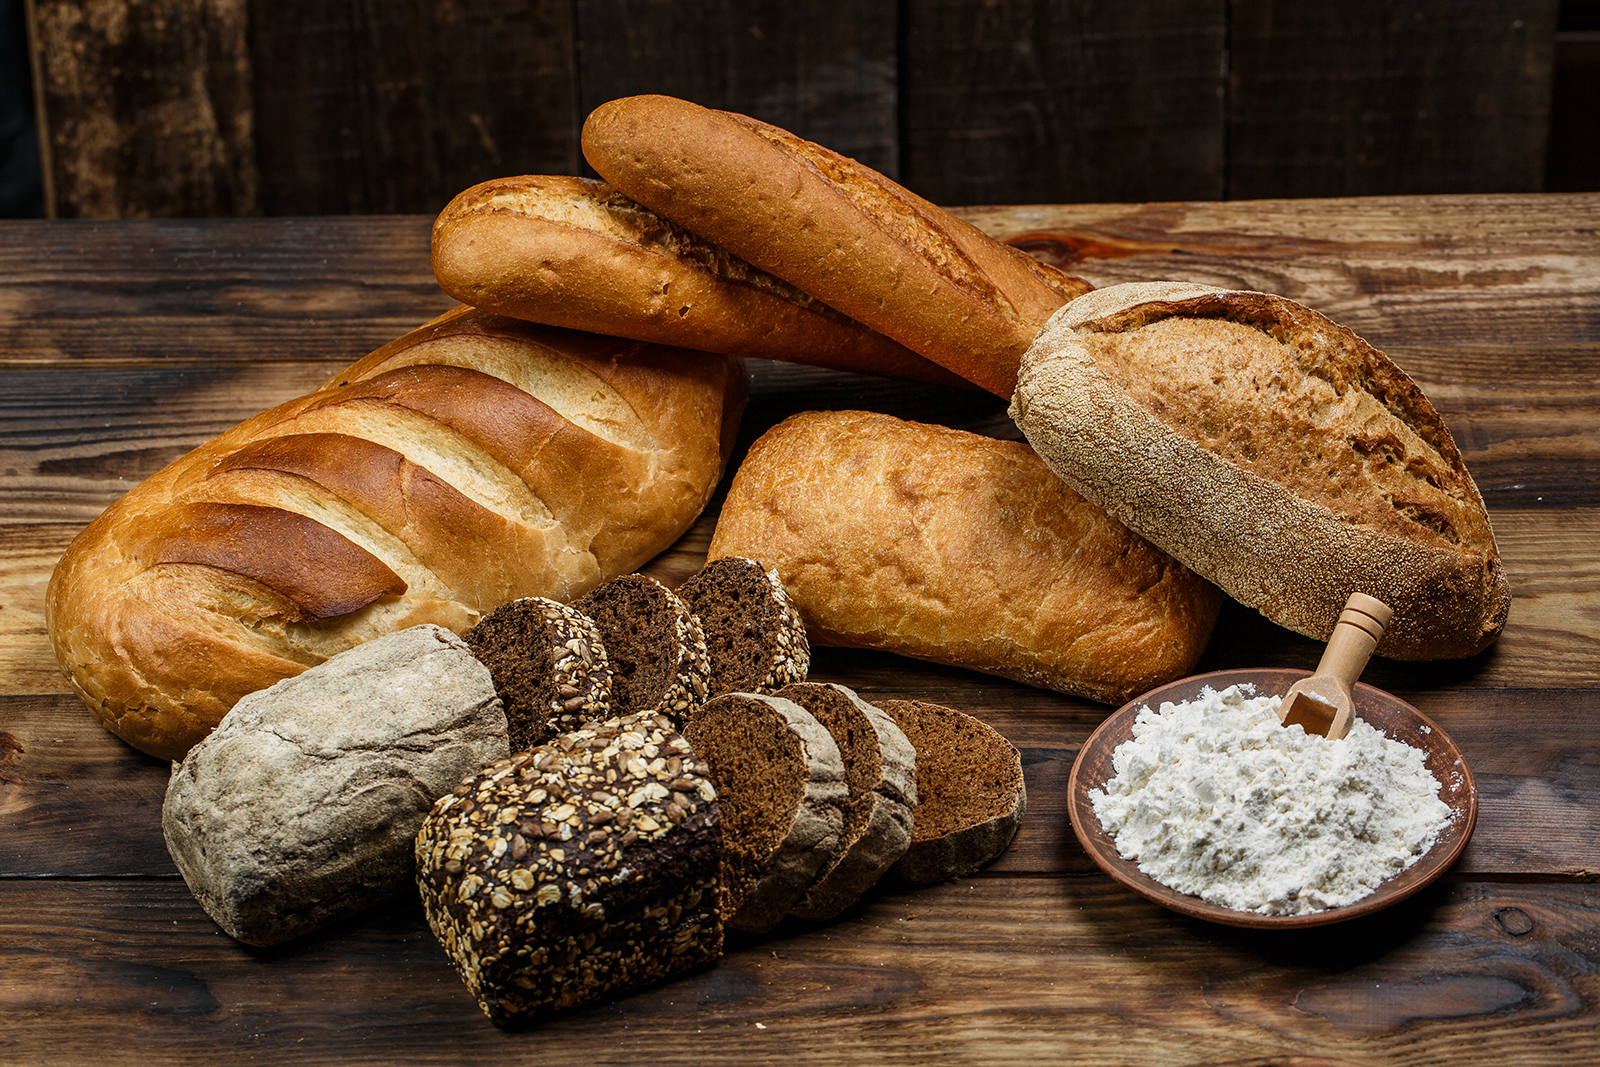 Bakery products are among the foods that too often end up in the trash.